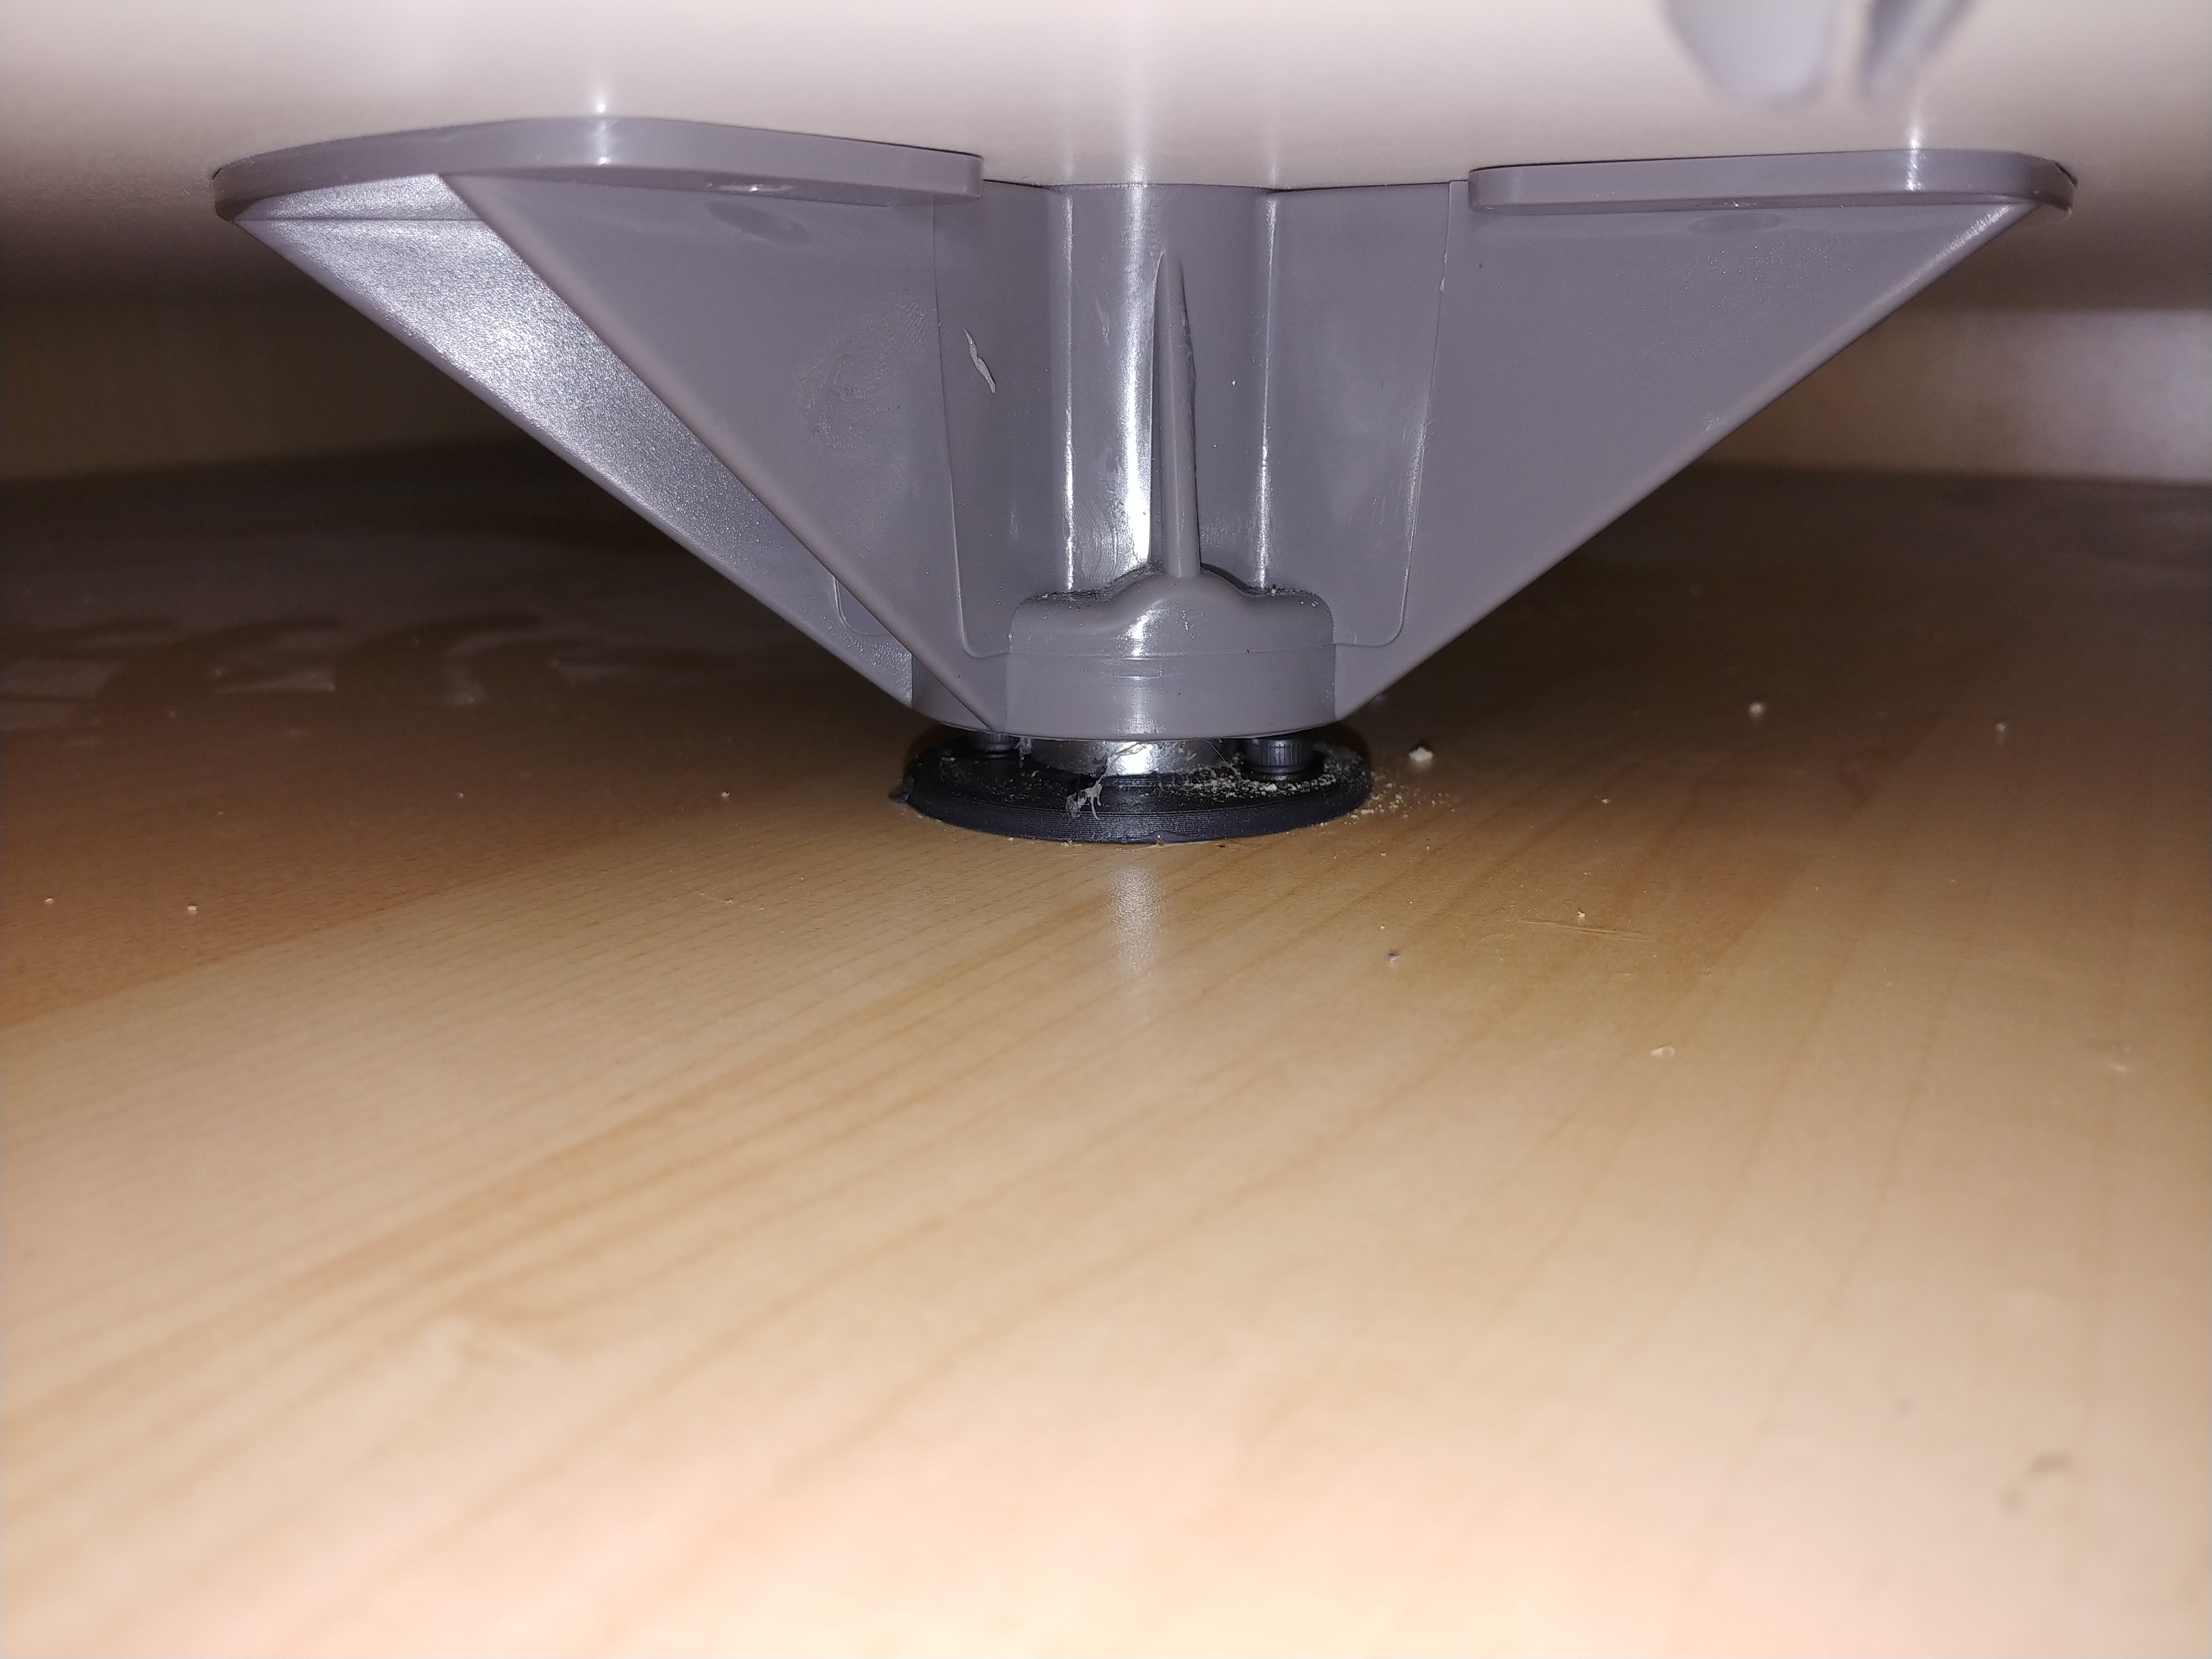 Axis replacement for IKEA Rationell Lazy Susan